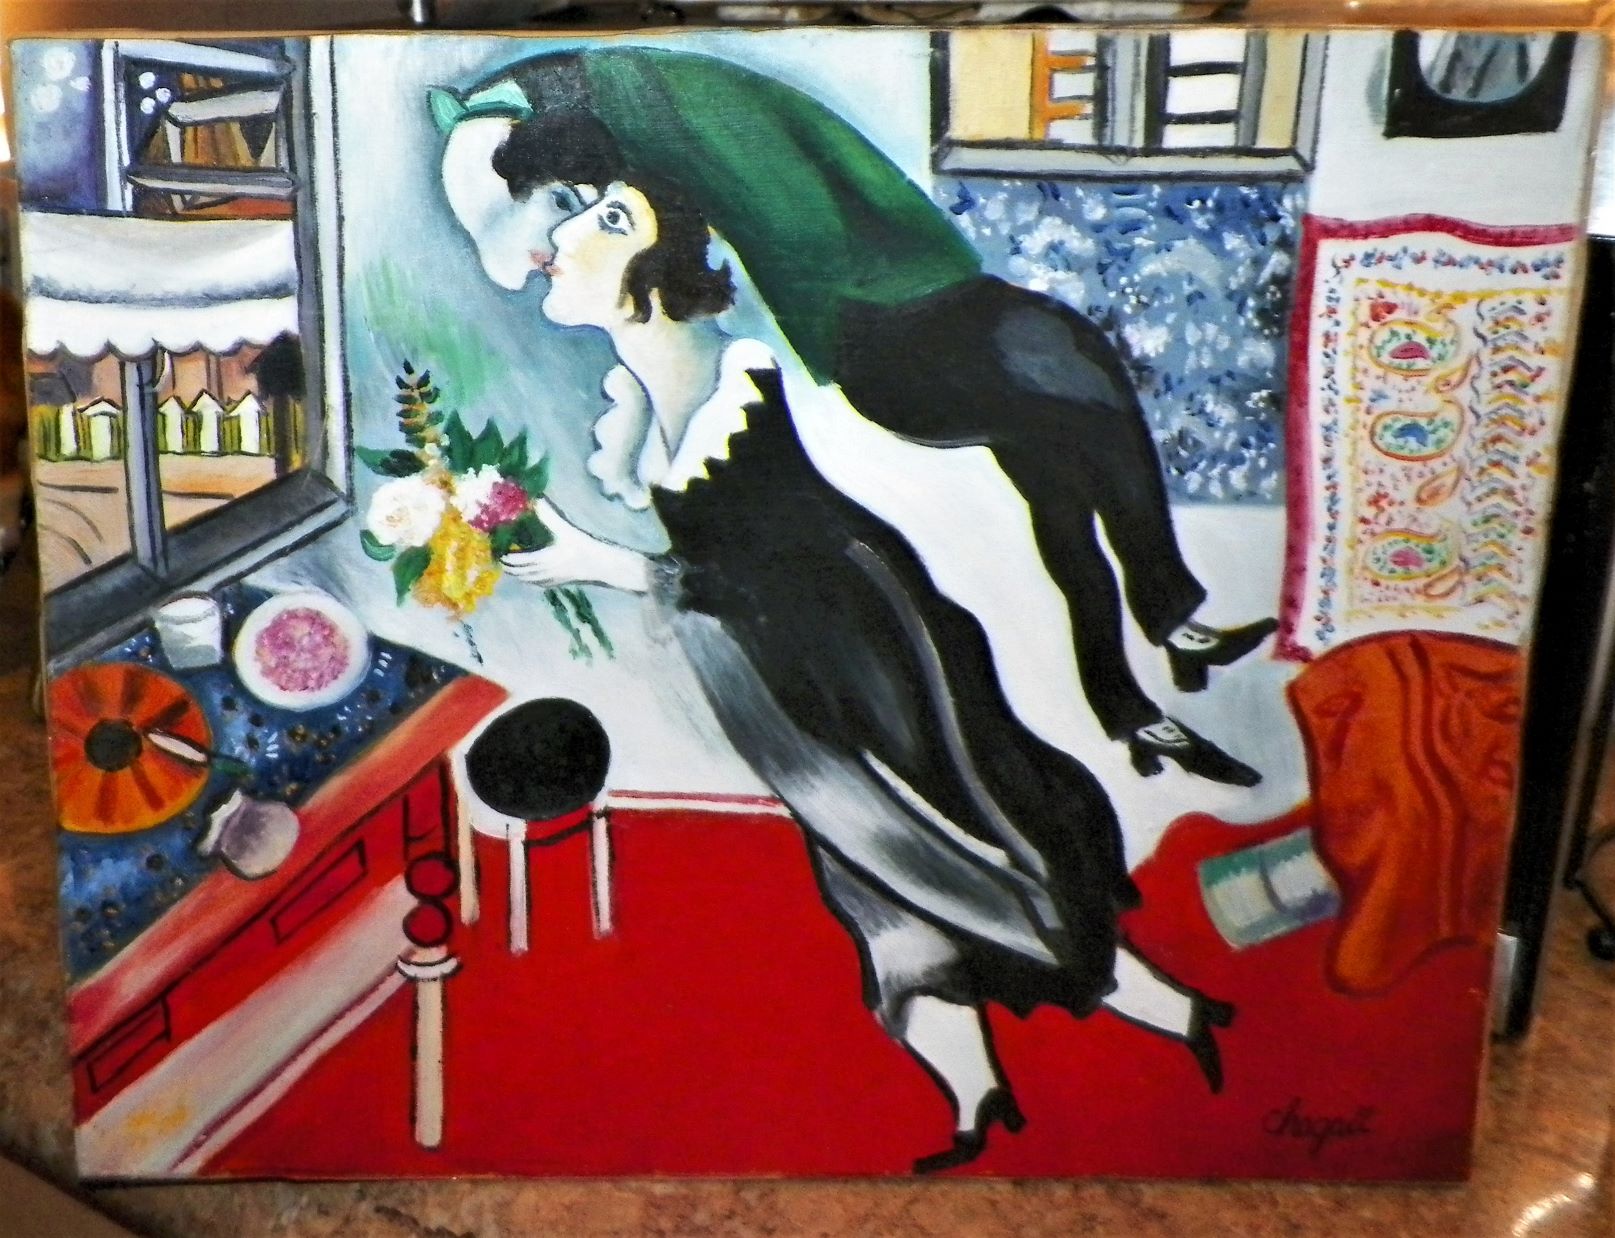 ART PAINTING CHAGALL SIGNED THRIFT STORE FIND 1AA.JPG